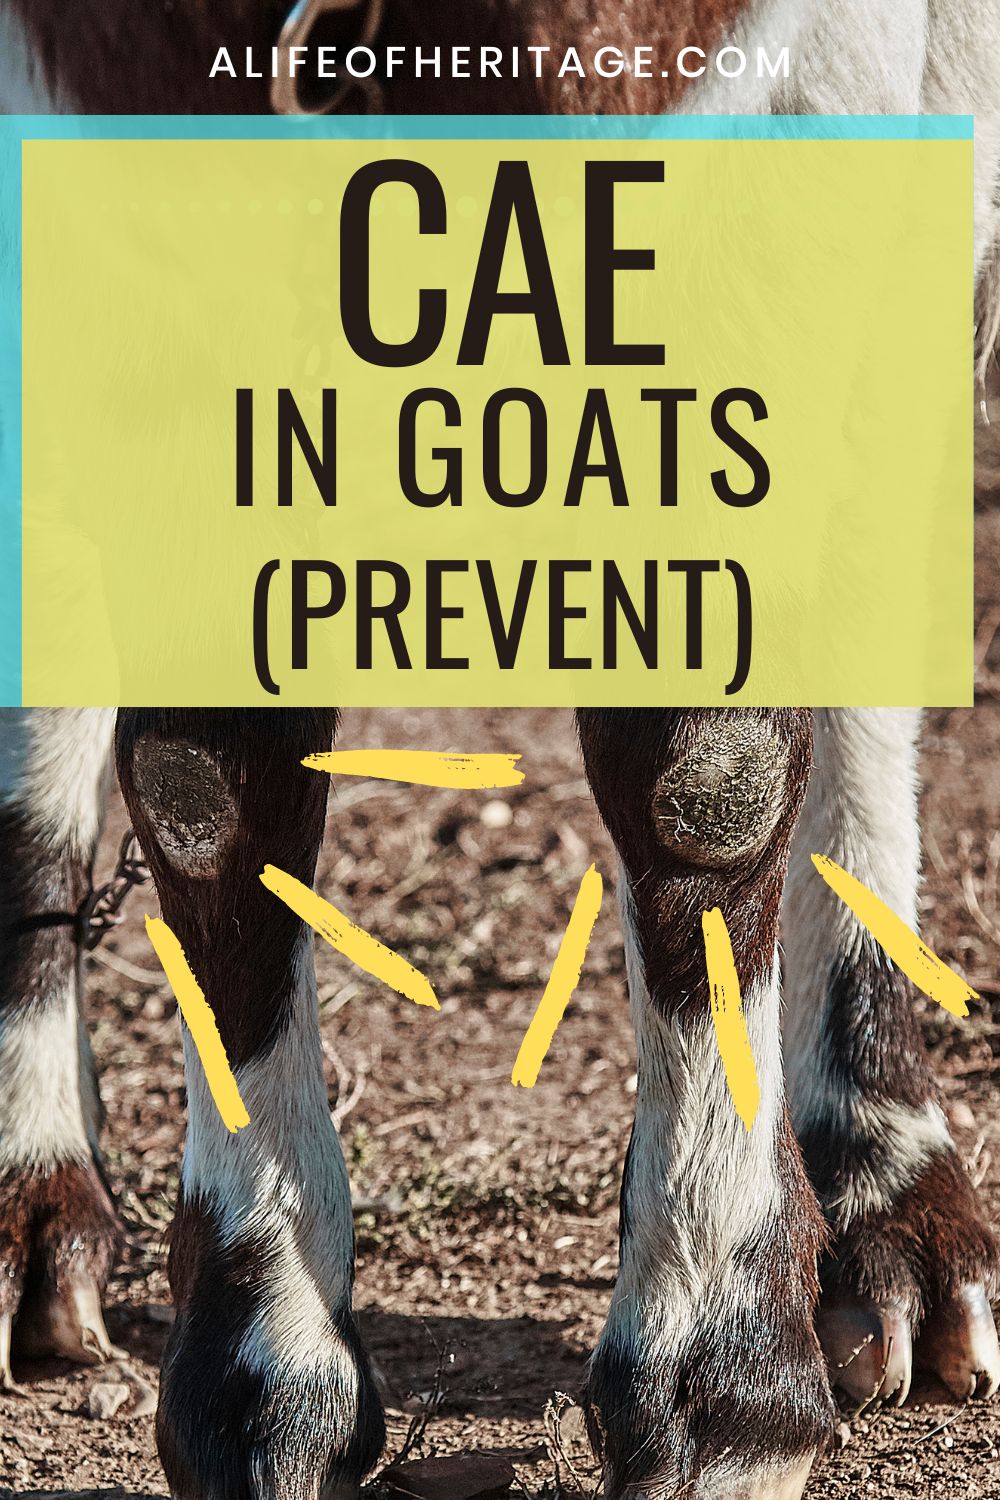 How to prevent CAE in goats